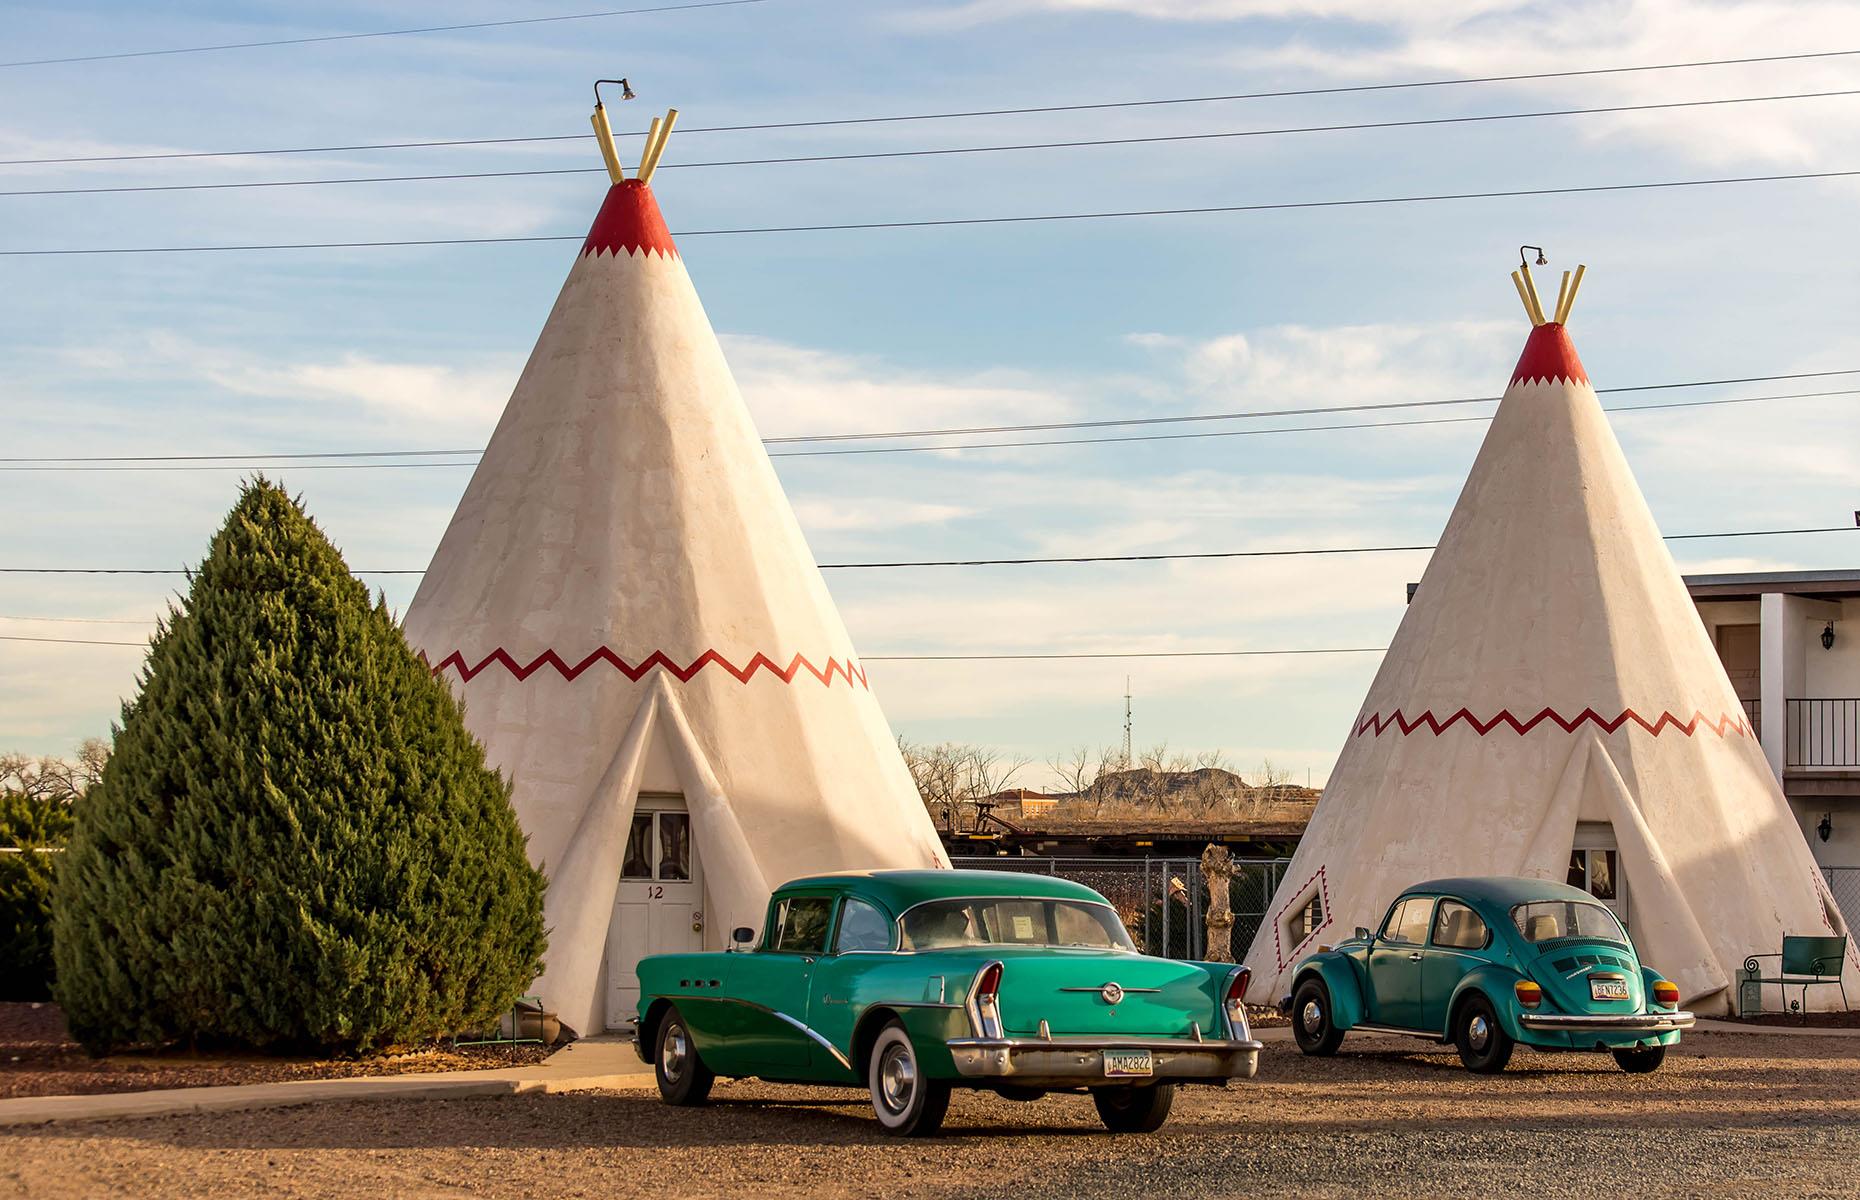 <p>Wild West fans should head to Holbrook, Arizona. Take a walk up Holbrook’s Bucket of Blood street, so named because two rival groups of cowboys had a bloody shoot-out here in 1886. Stay in one of the giant wigwams at the quirky <a href="http://sleepinawigwam.com/">Wigwam Motel</a>, somewhere you can expect oodles of character, if not luxury.</p>